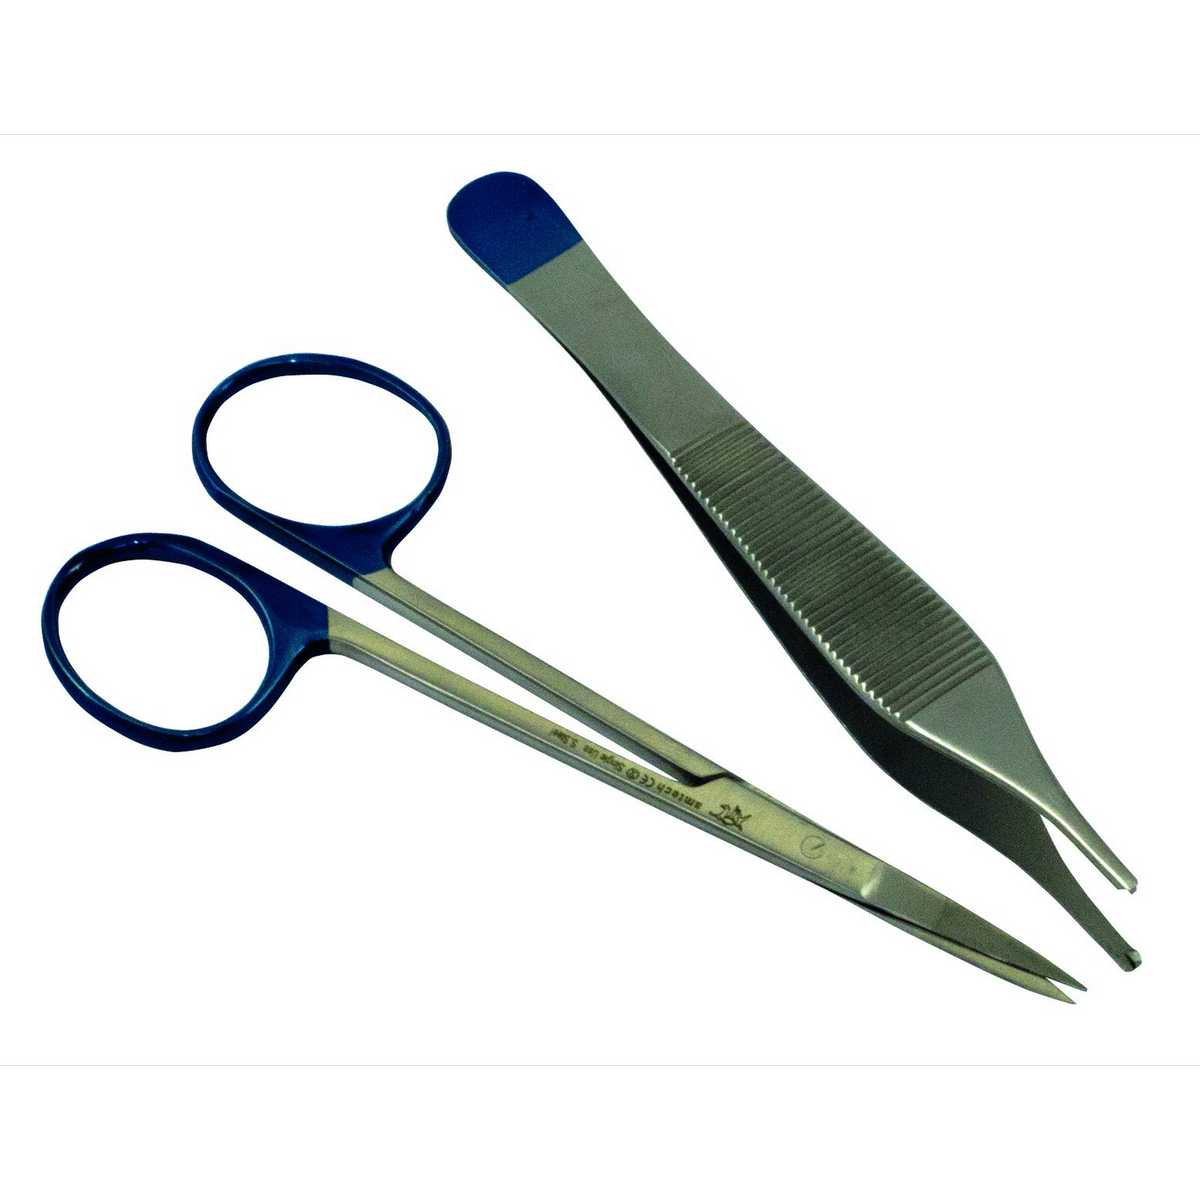 Amtech Suture Removal Kit 2 Piece Sterile (1 x Adson Forcep, 1 x Curved Sharp)